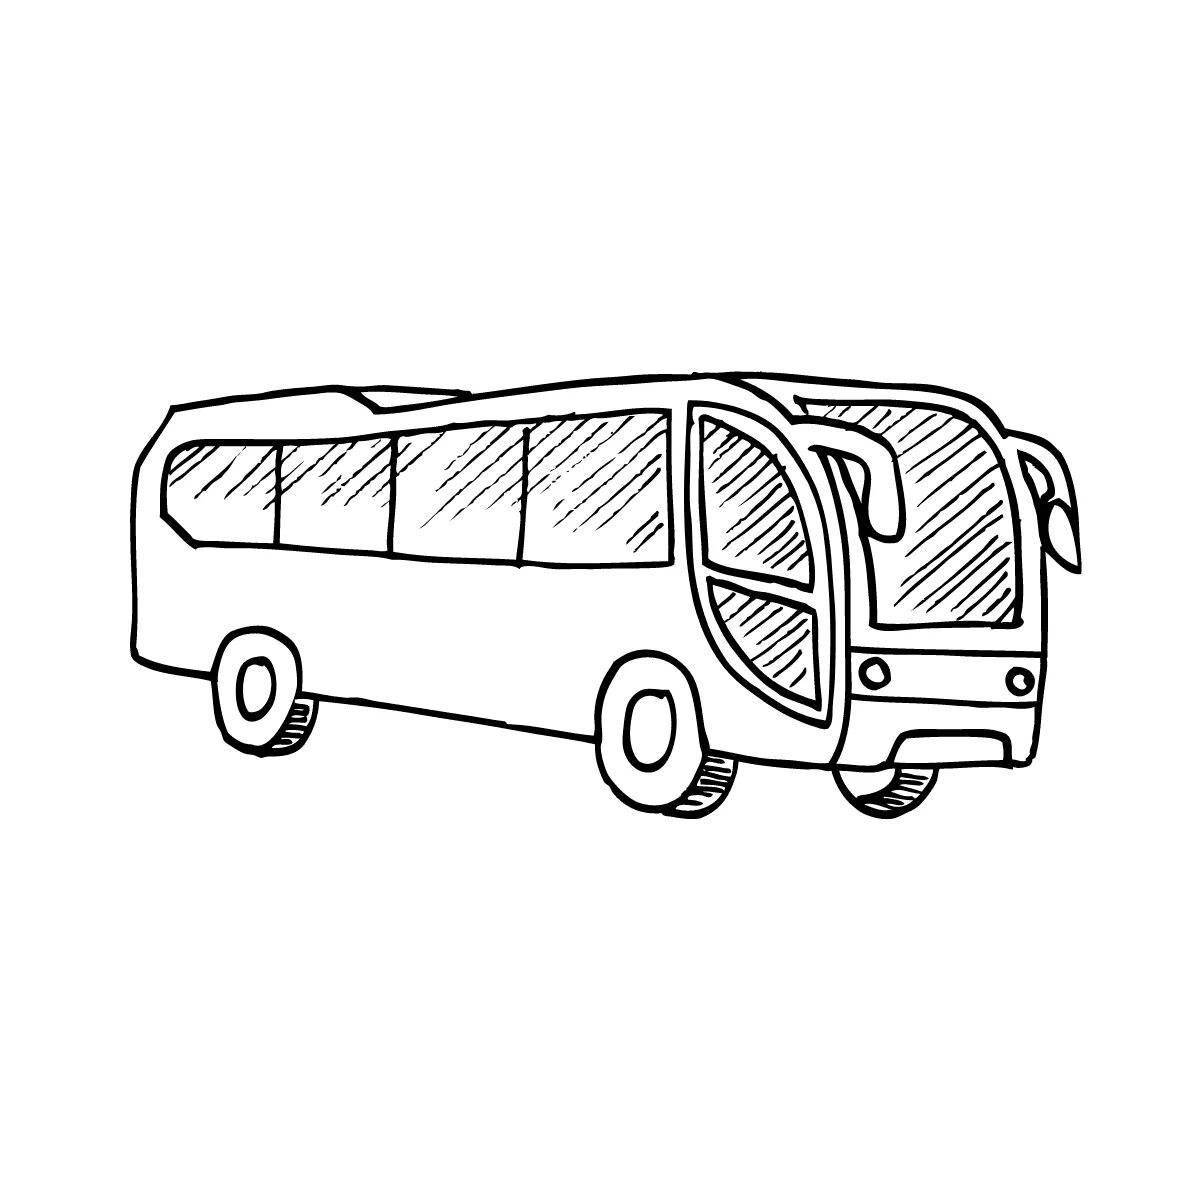 Coloring page for a spectacular electric bus